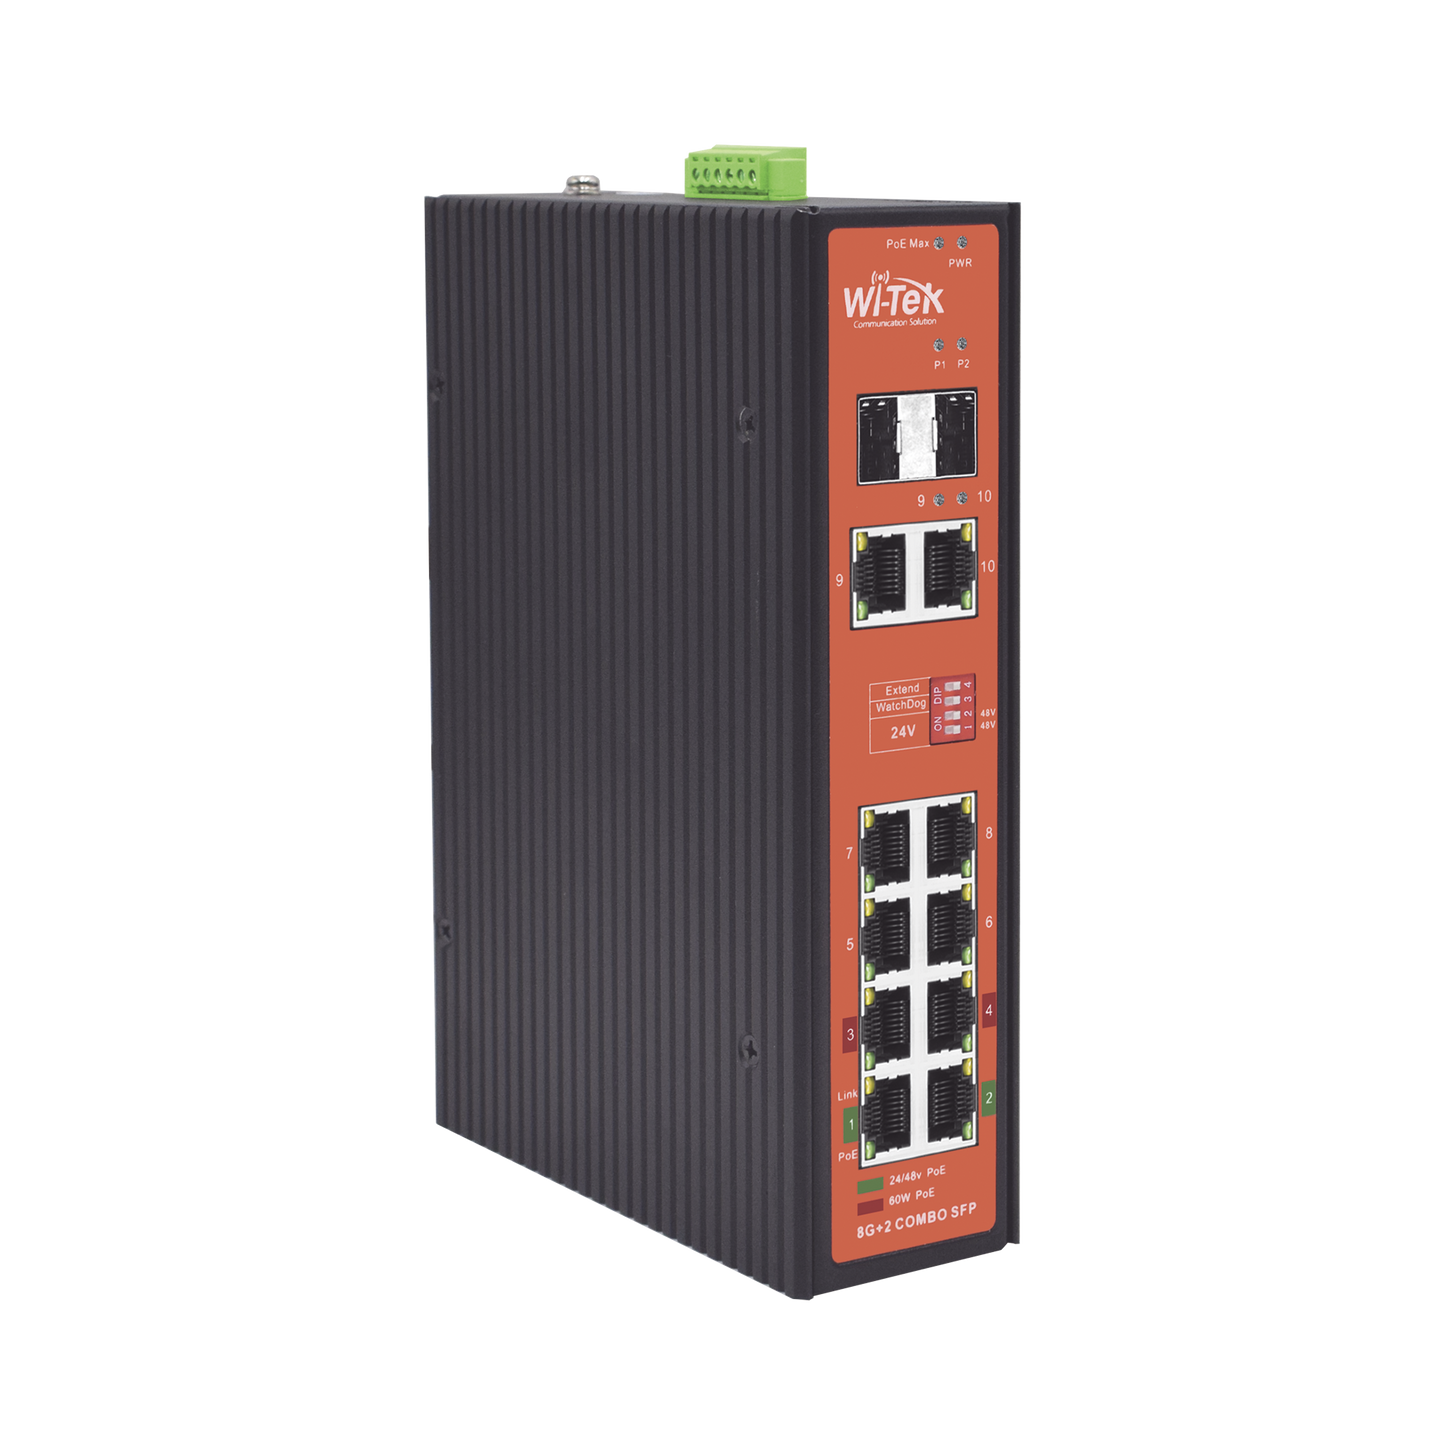 Industrial Switch PoE ++ and passive 24V, unmanageable with 8 Gigabit ports + 2 SFP combo